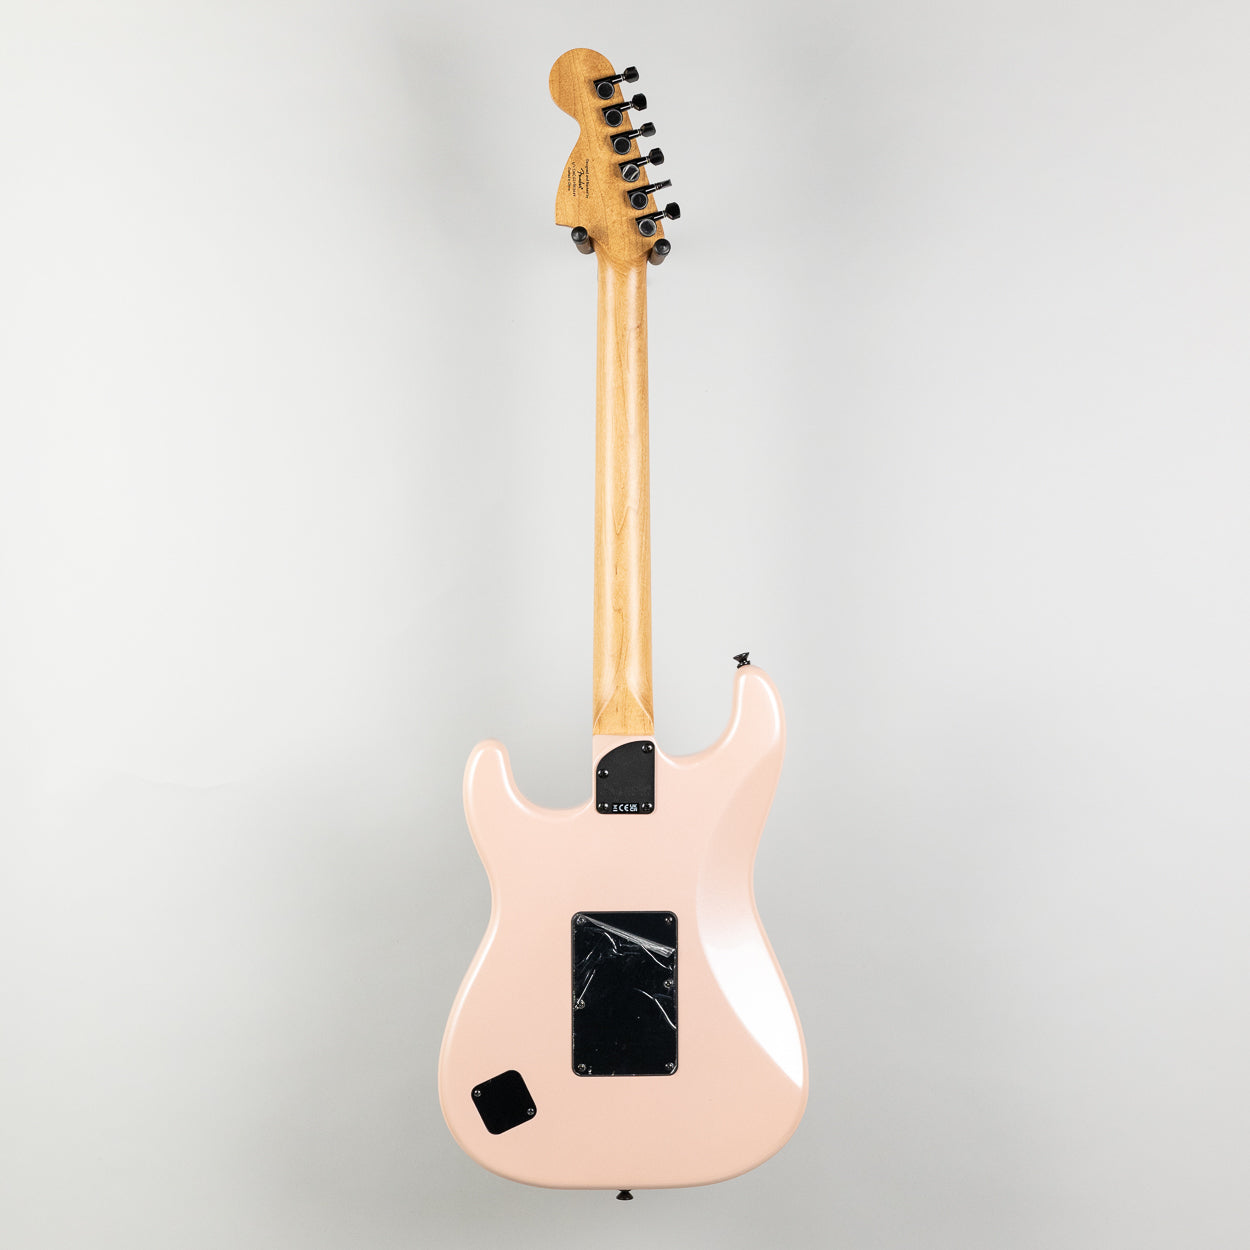 Squier Contemporary Stratocaster HH FR in Shell Pink Pearl